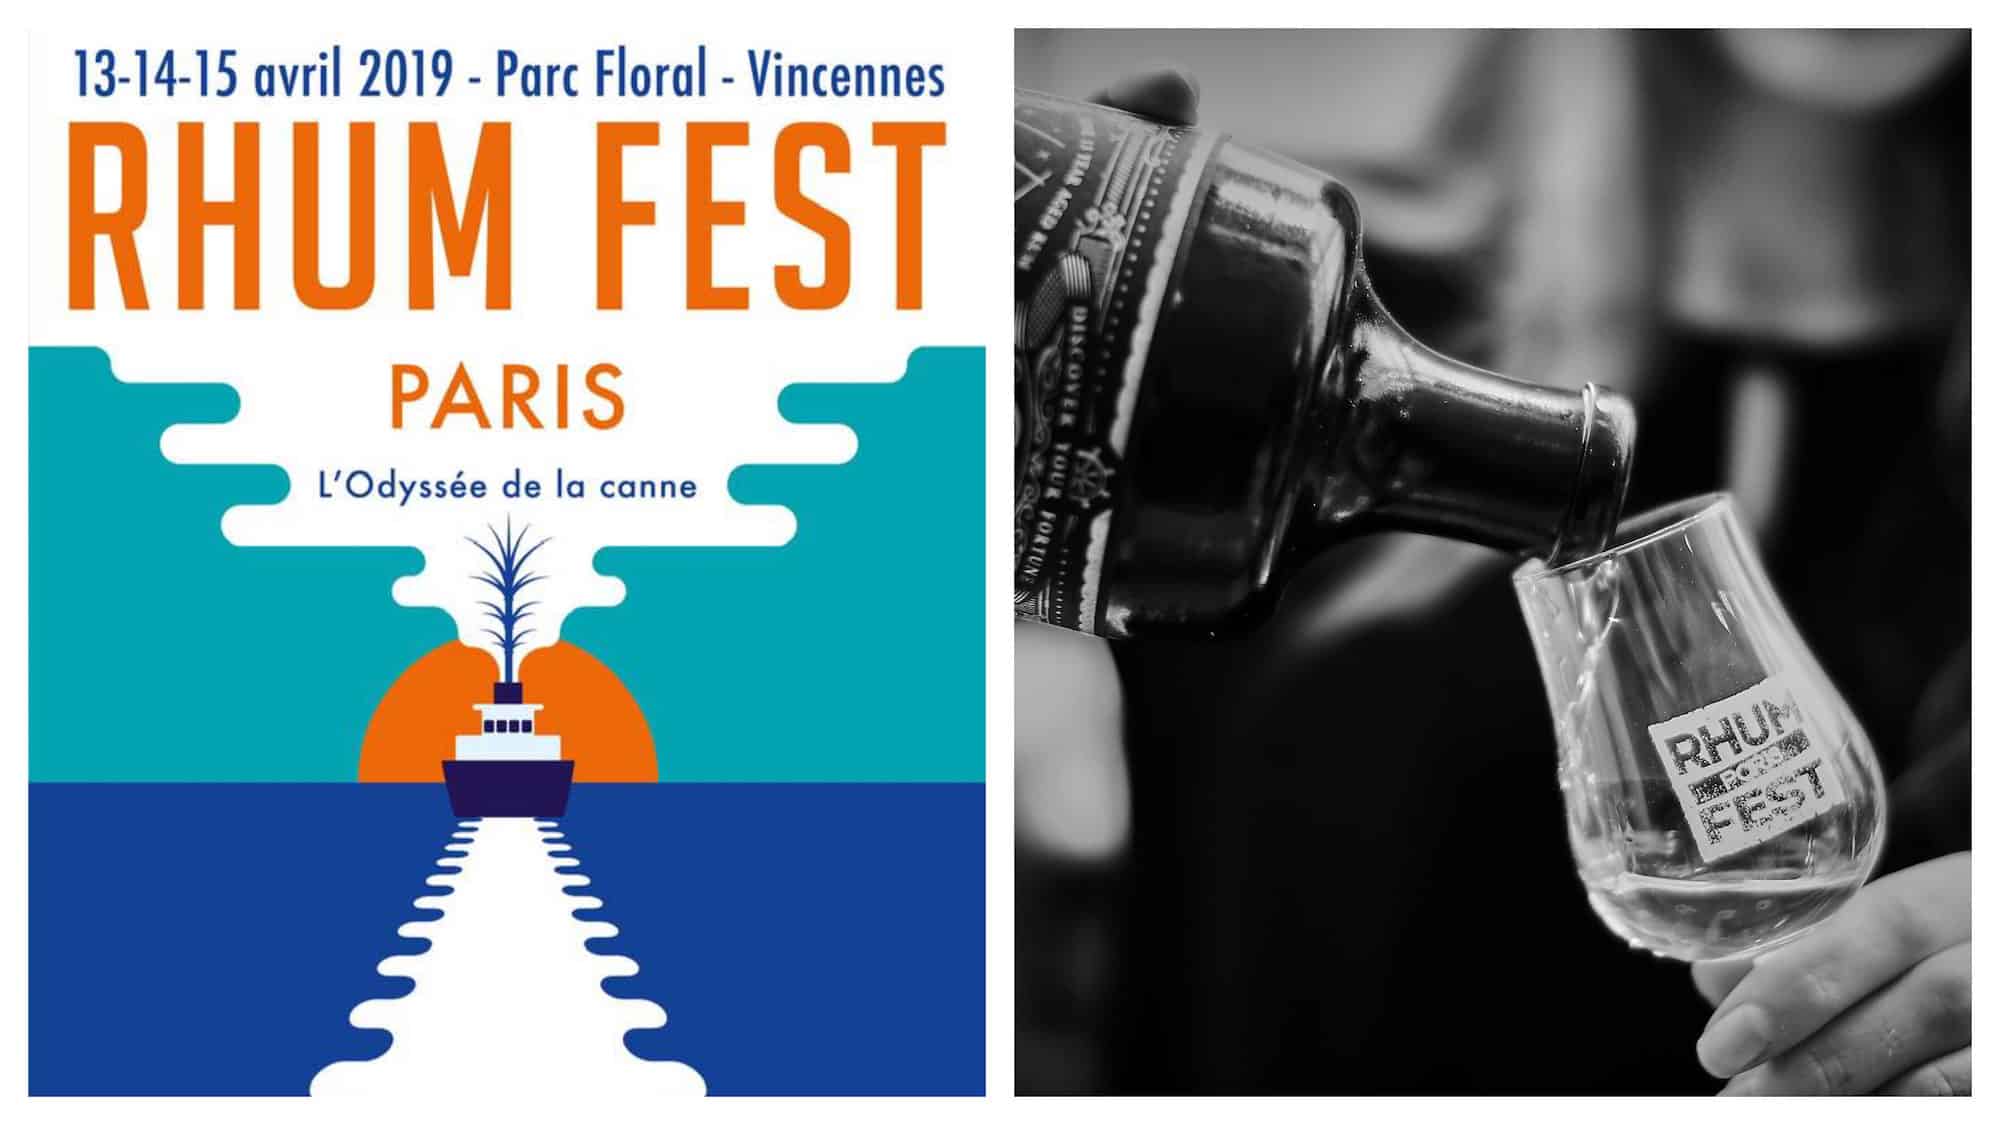 A poster for the Paris rum festival in April with a block painting of a boat out to see (left). Someone pouring rum into a glass at the Paris rum festival (right).